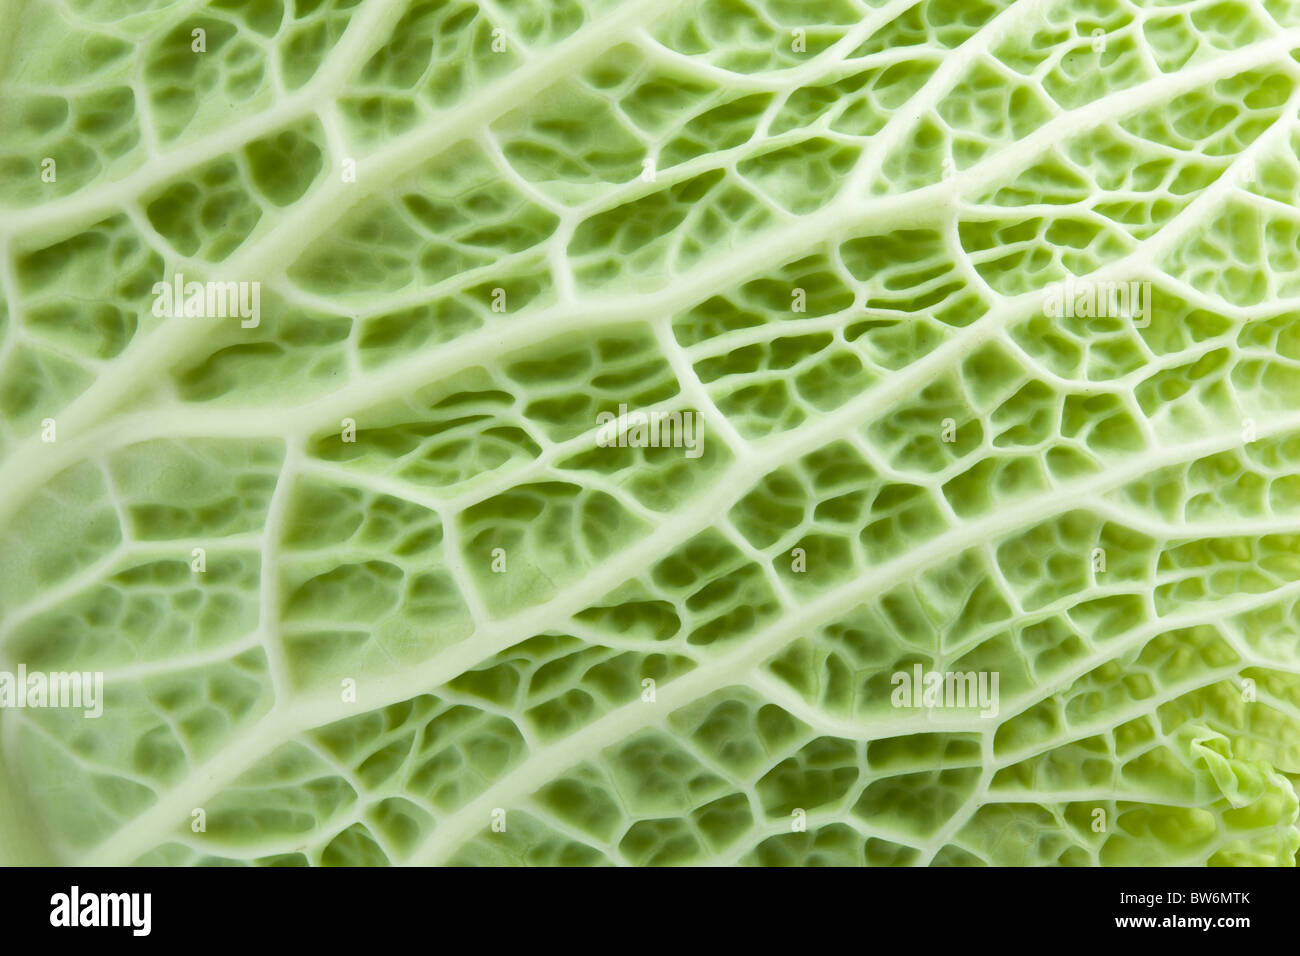 Image texture cabbage leaf Stock Photo